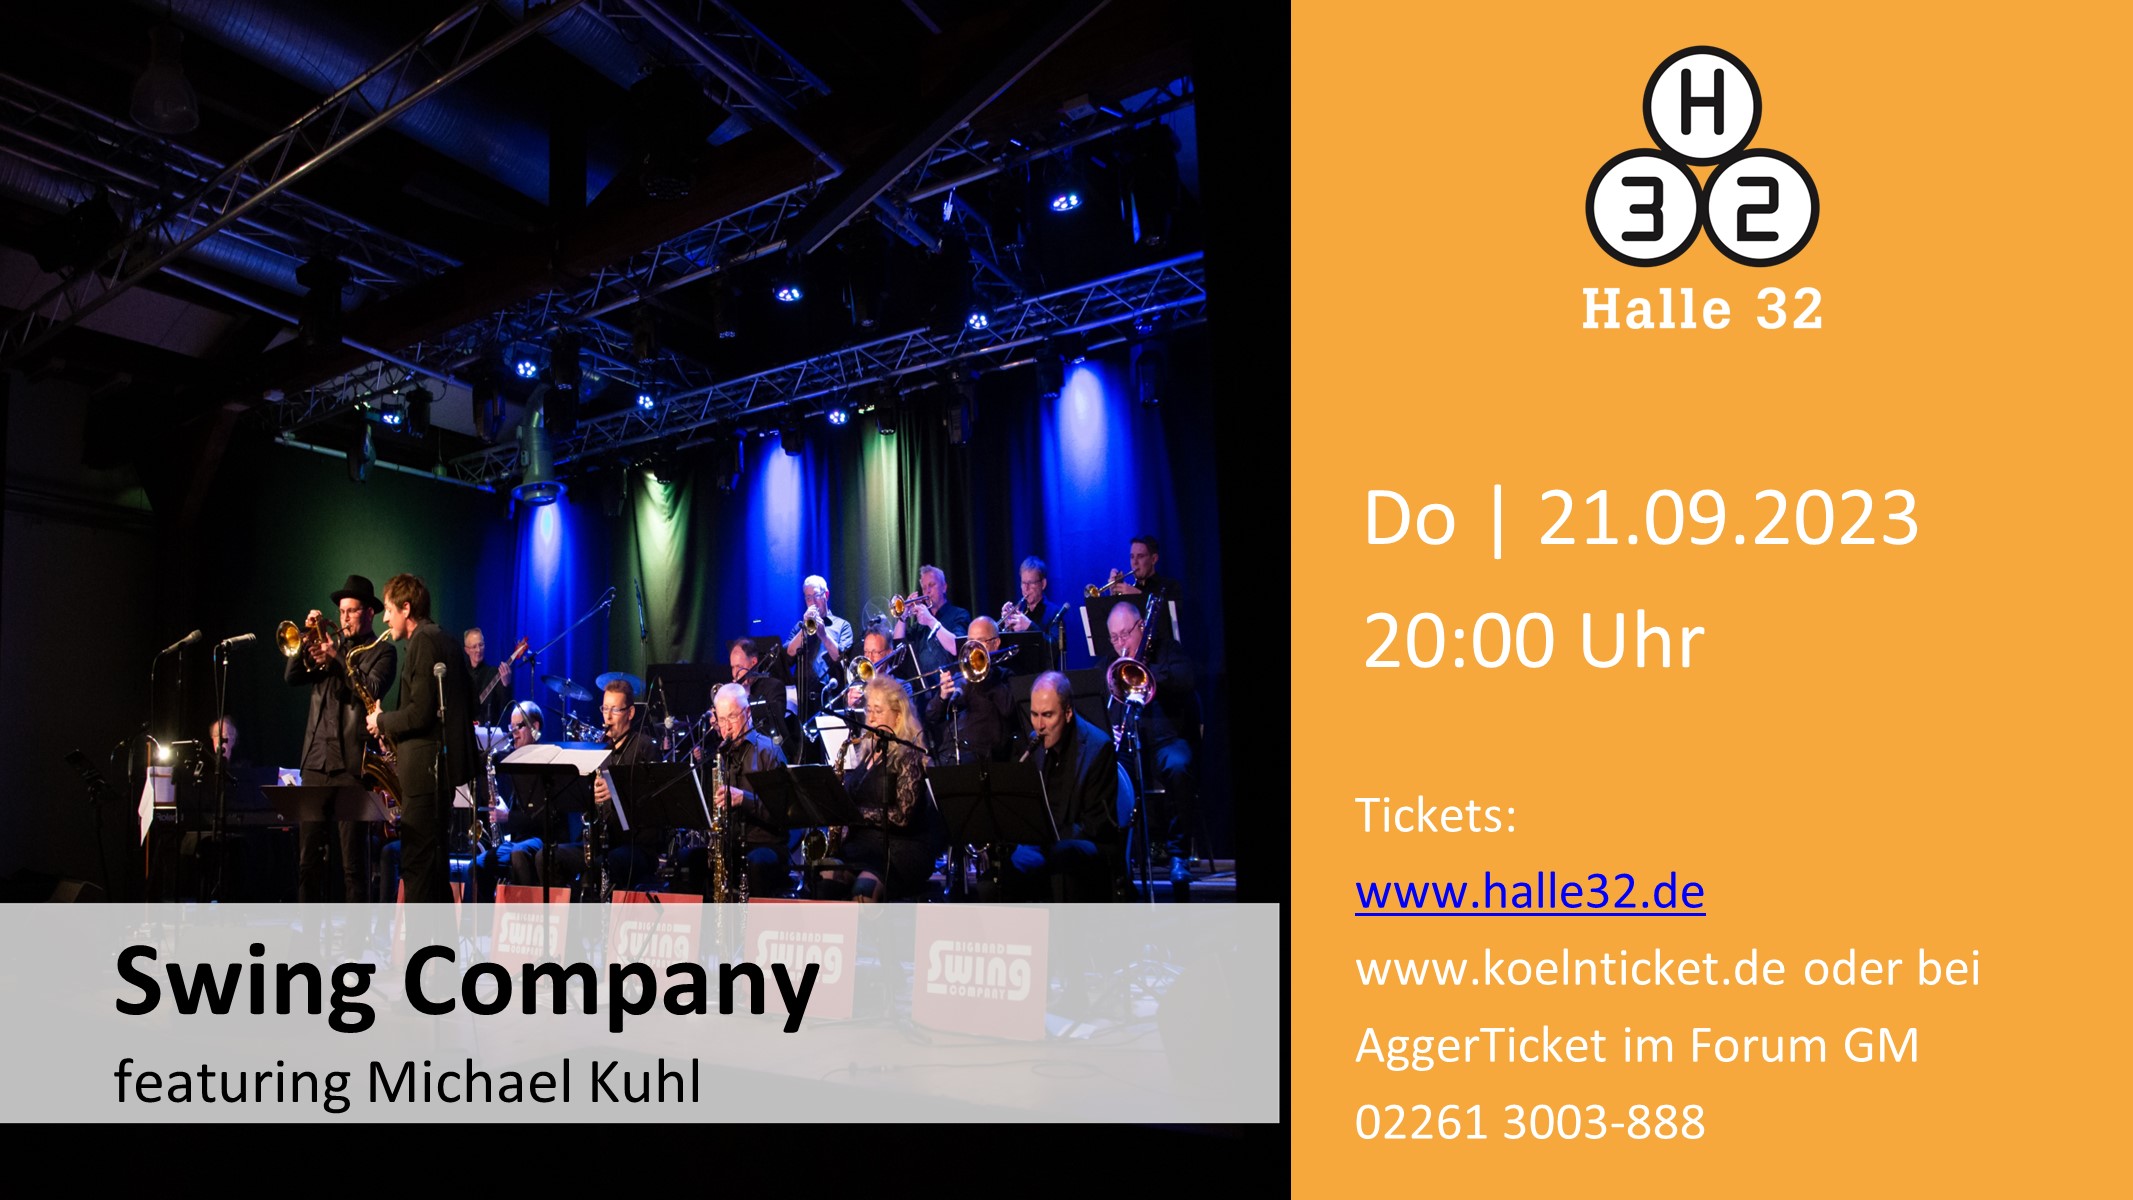 Halle 32 | Big Band Swing Company featuring Michael Kuhl